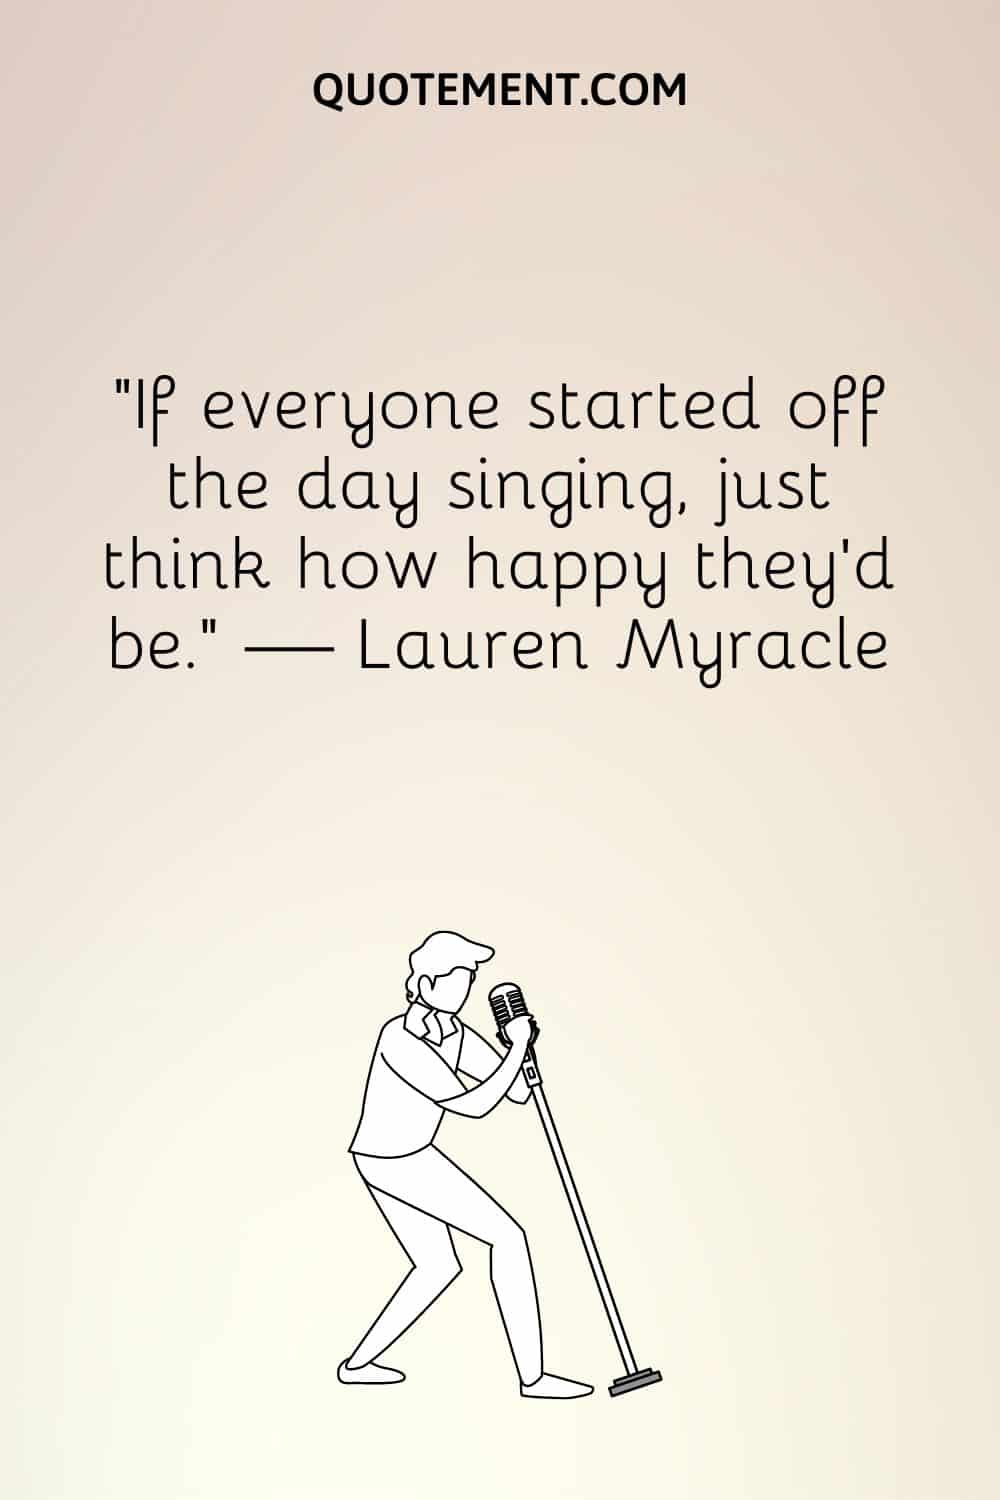 “If everyone started off the day singing, just think how happy they'd be.” — Lauren Myracle